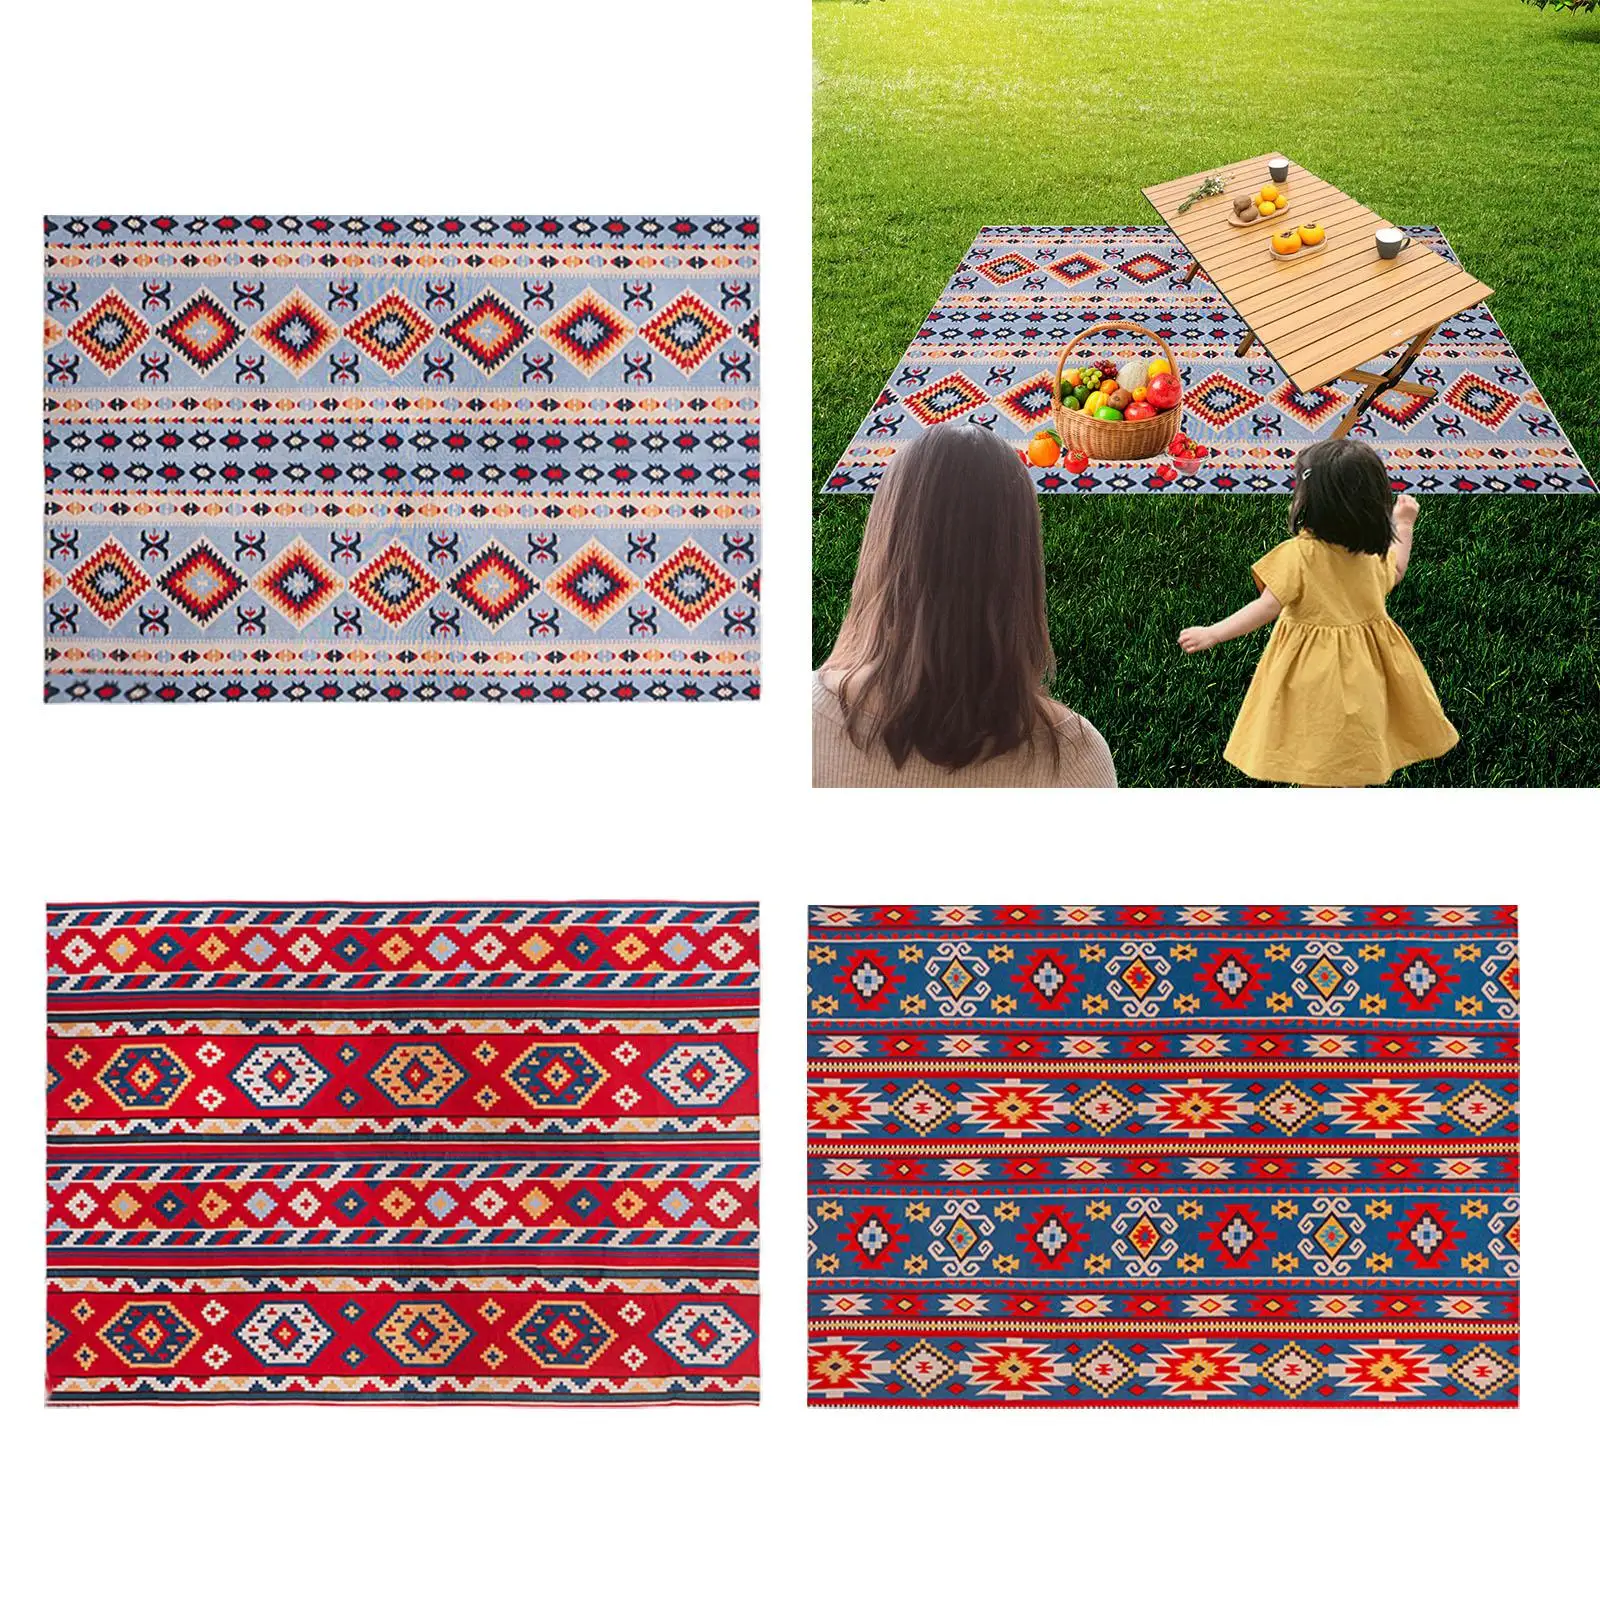 Large Picnic Outdoor Blanket Waterproof Portable Camping Blanket Picnic Mat Outdoor Mat for Park Lawn Garden Camping Sports